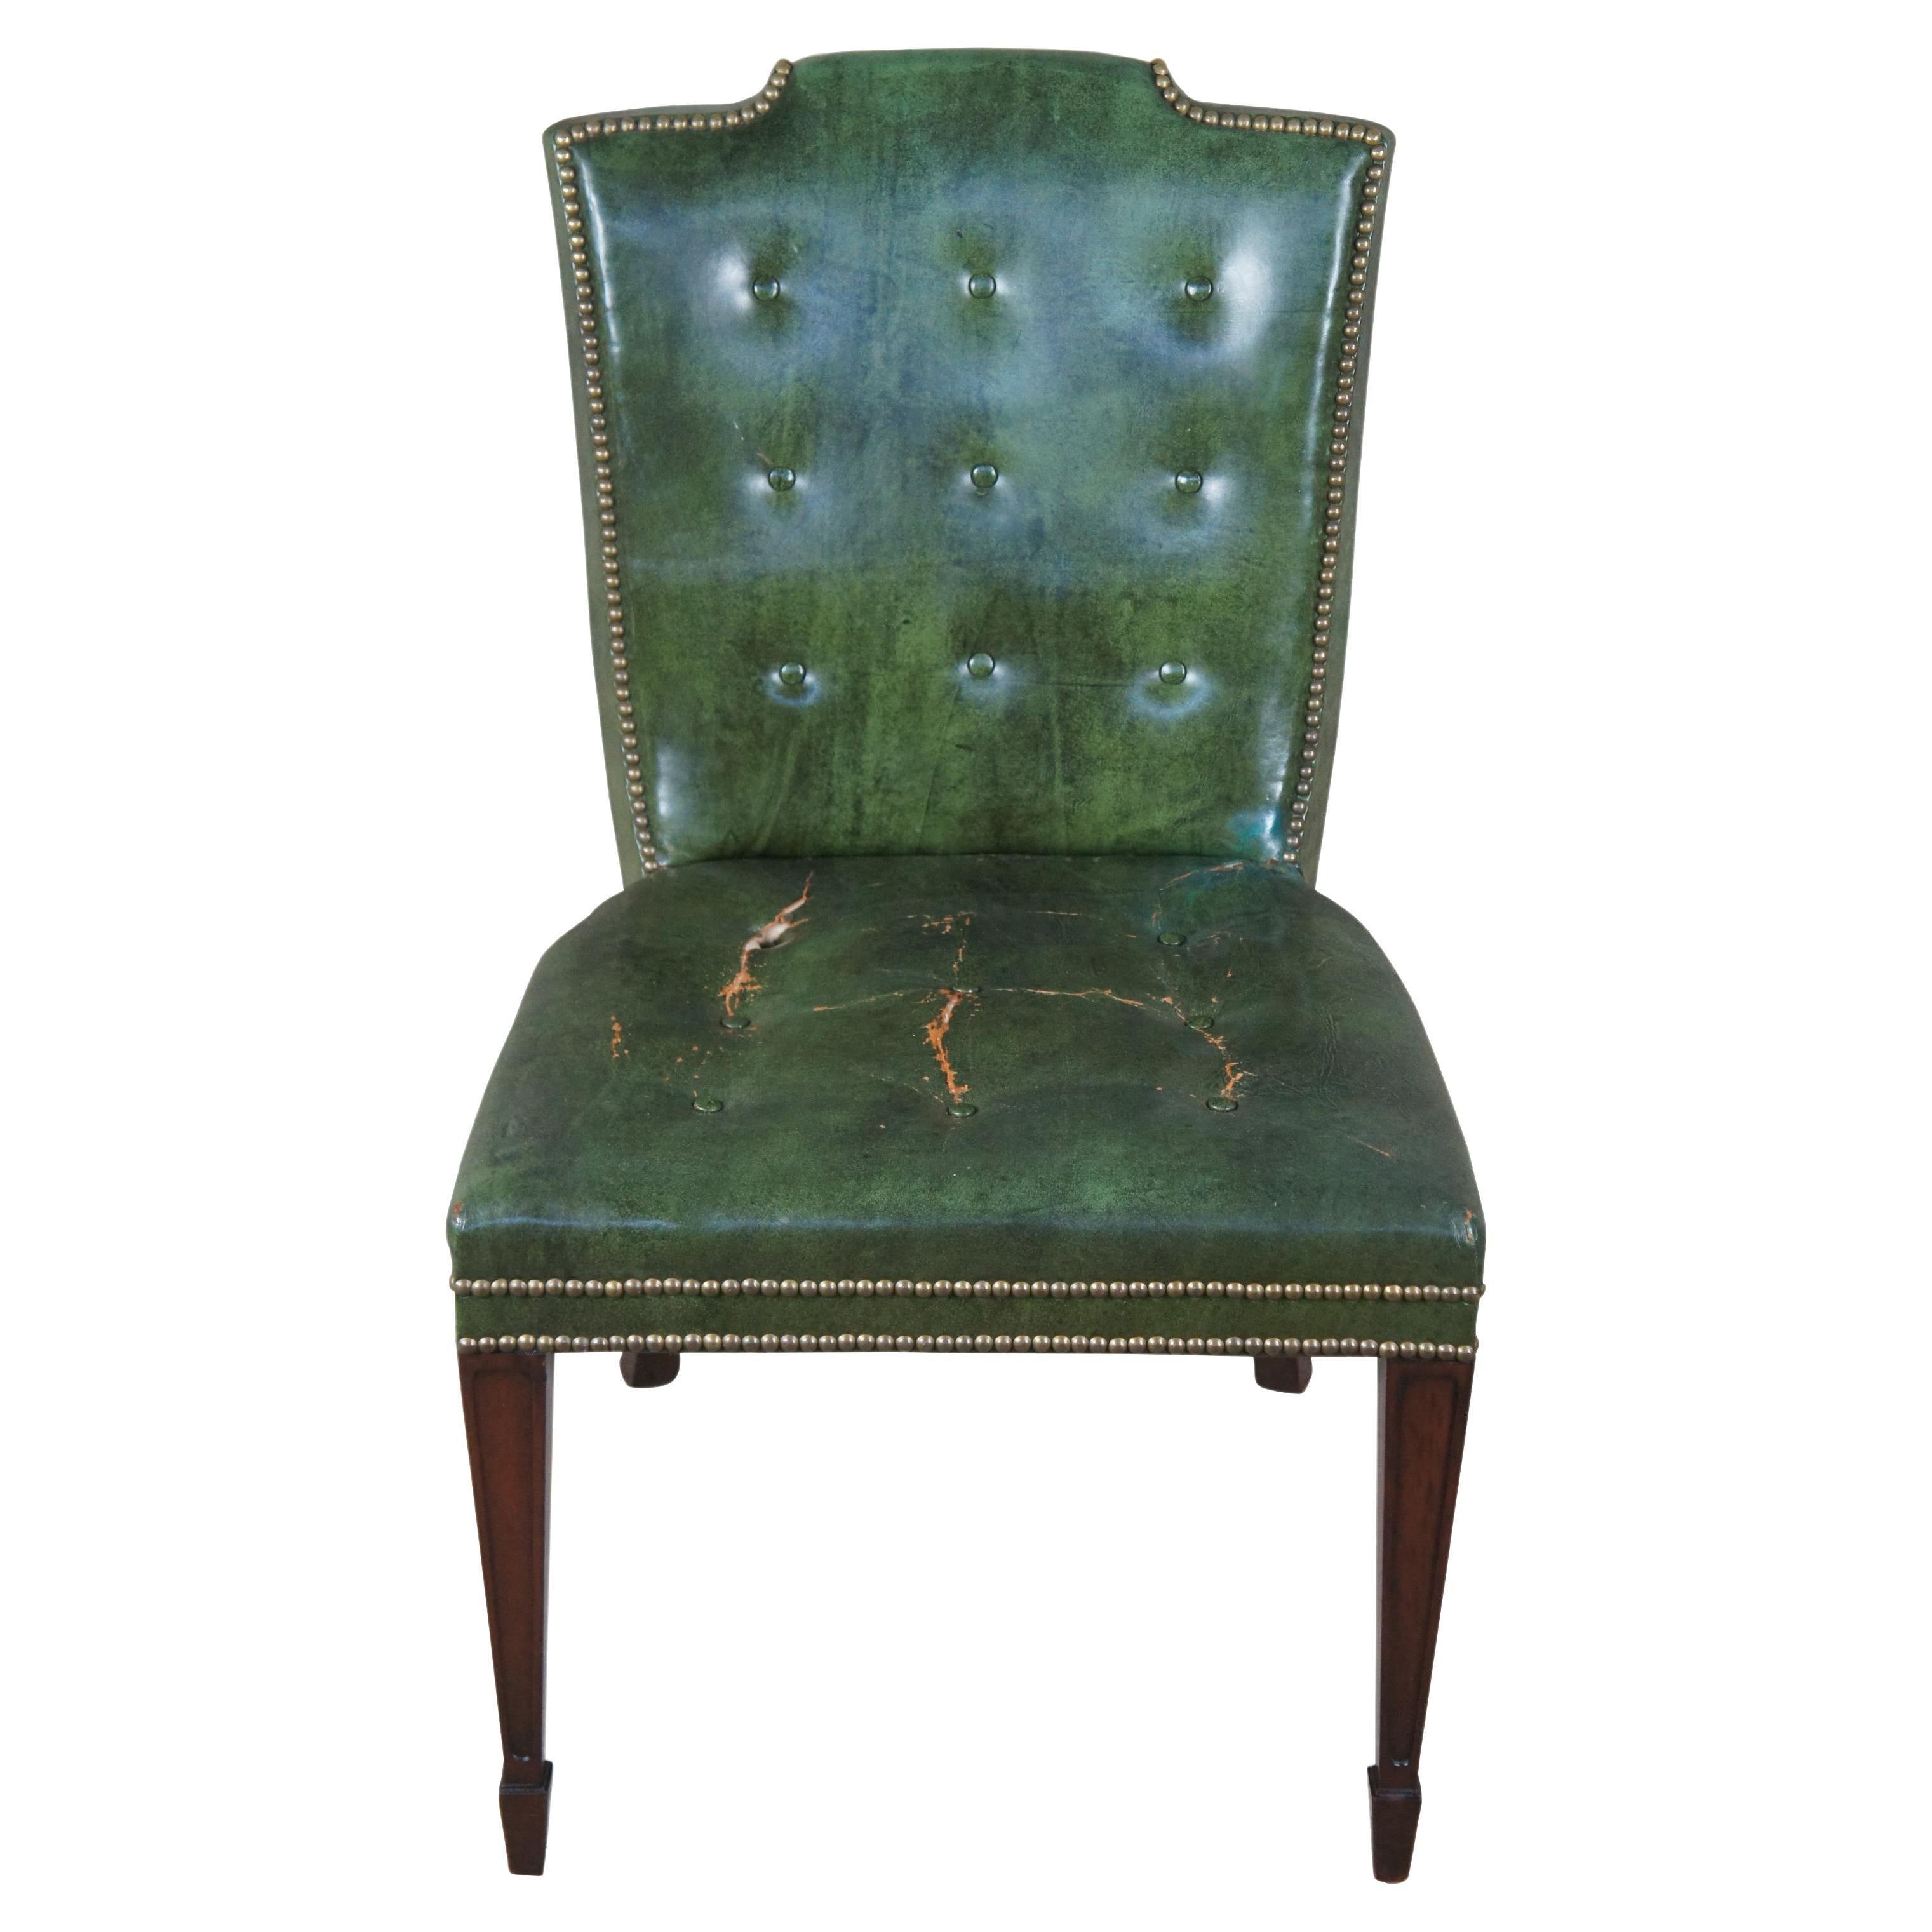 A Stunning side or desk chair by Heritage Furniture, circa 1950s. Heritage later became Drexel Heritage. Features a mahogany frame inspired by Sheraton and federal styling with a contoured back, upholstered in green leather with button tufting and